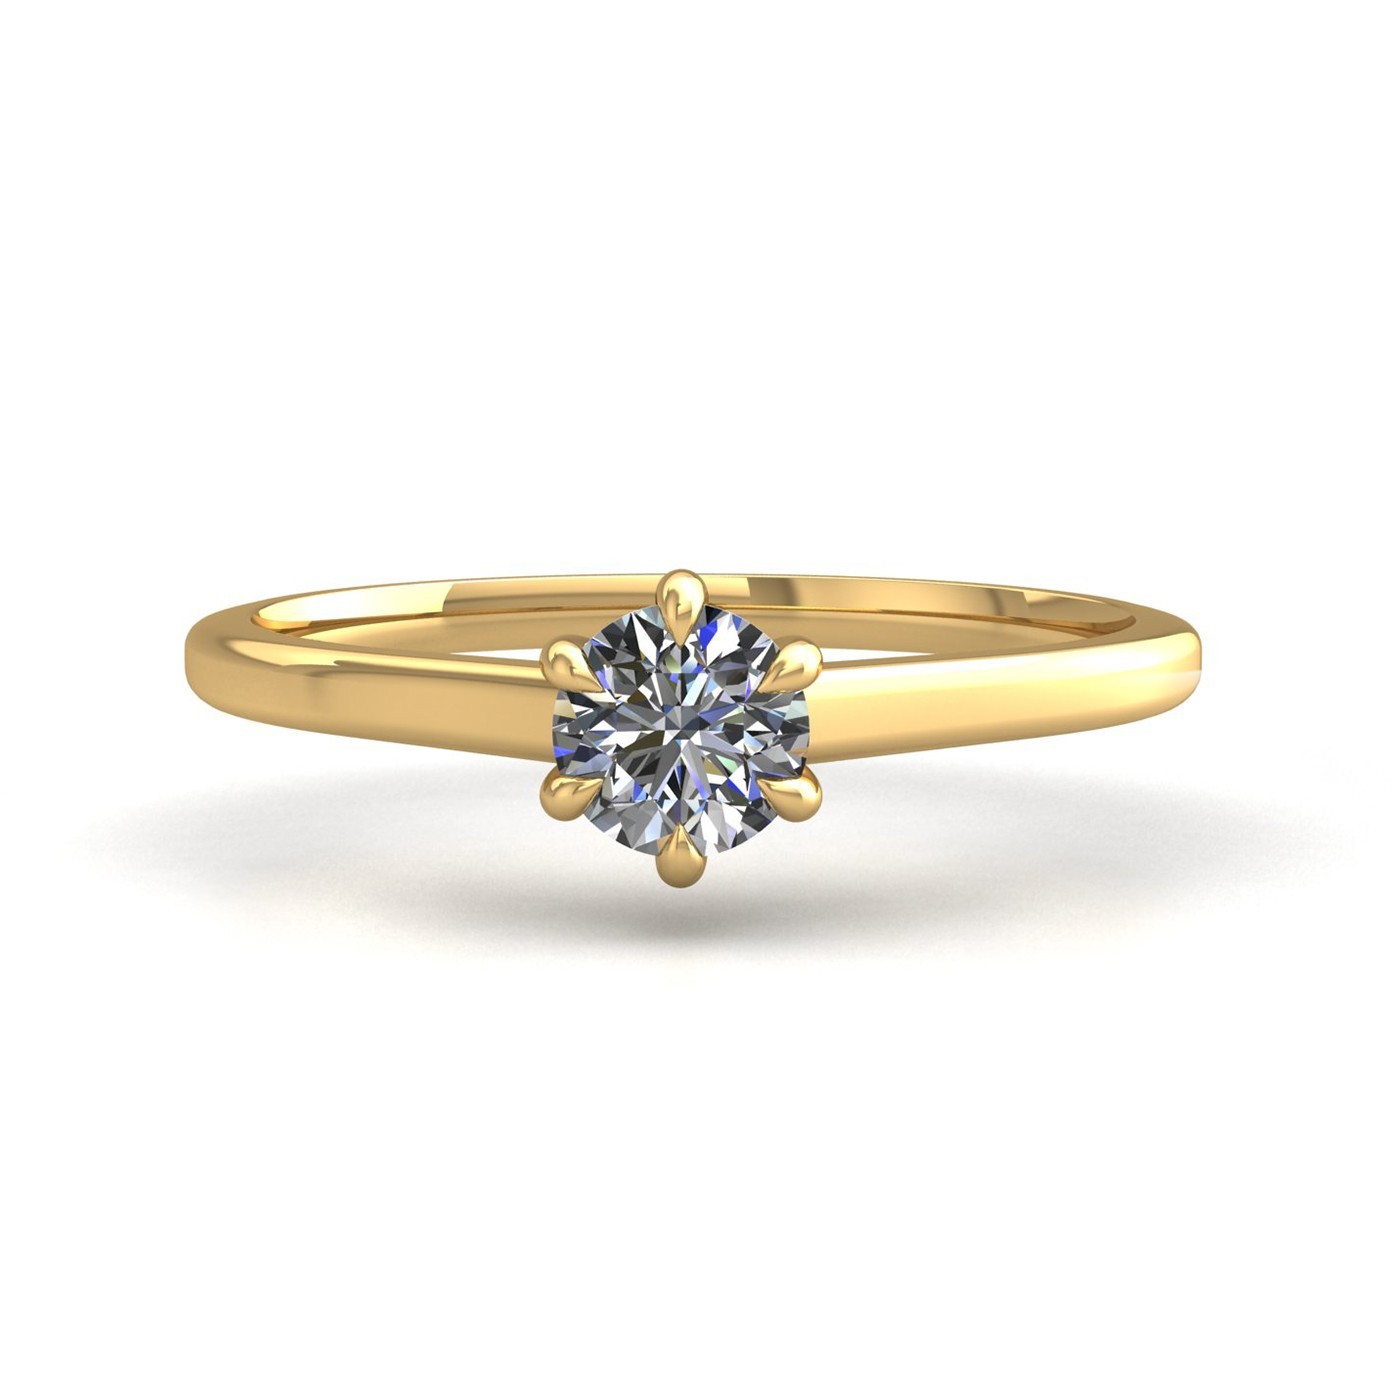 18k yellow gold 0,50 ct 6 prongs solitaire round cut diamond engagement ring with whisper thin band Photos & images